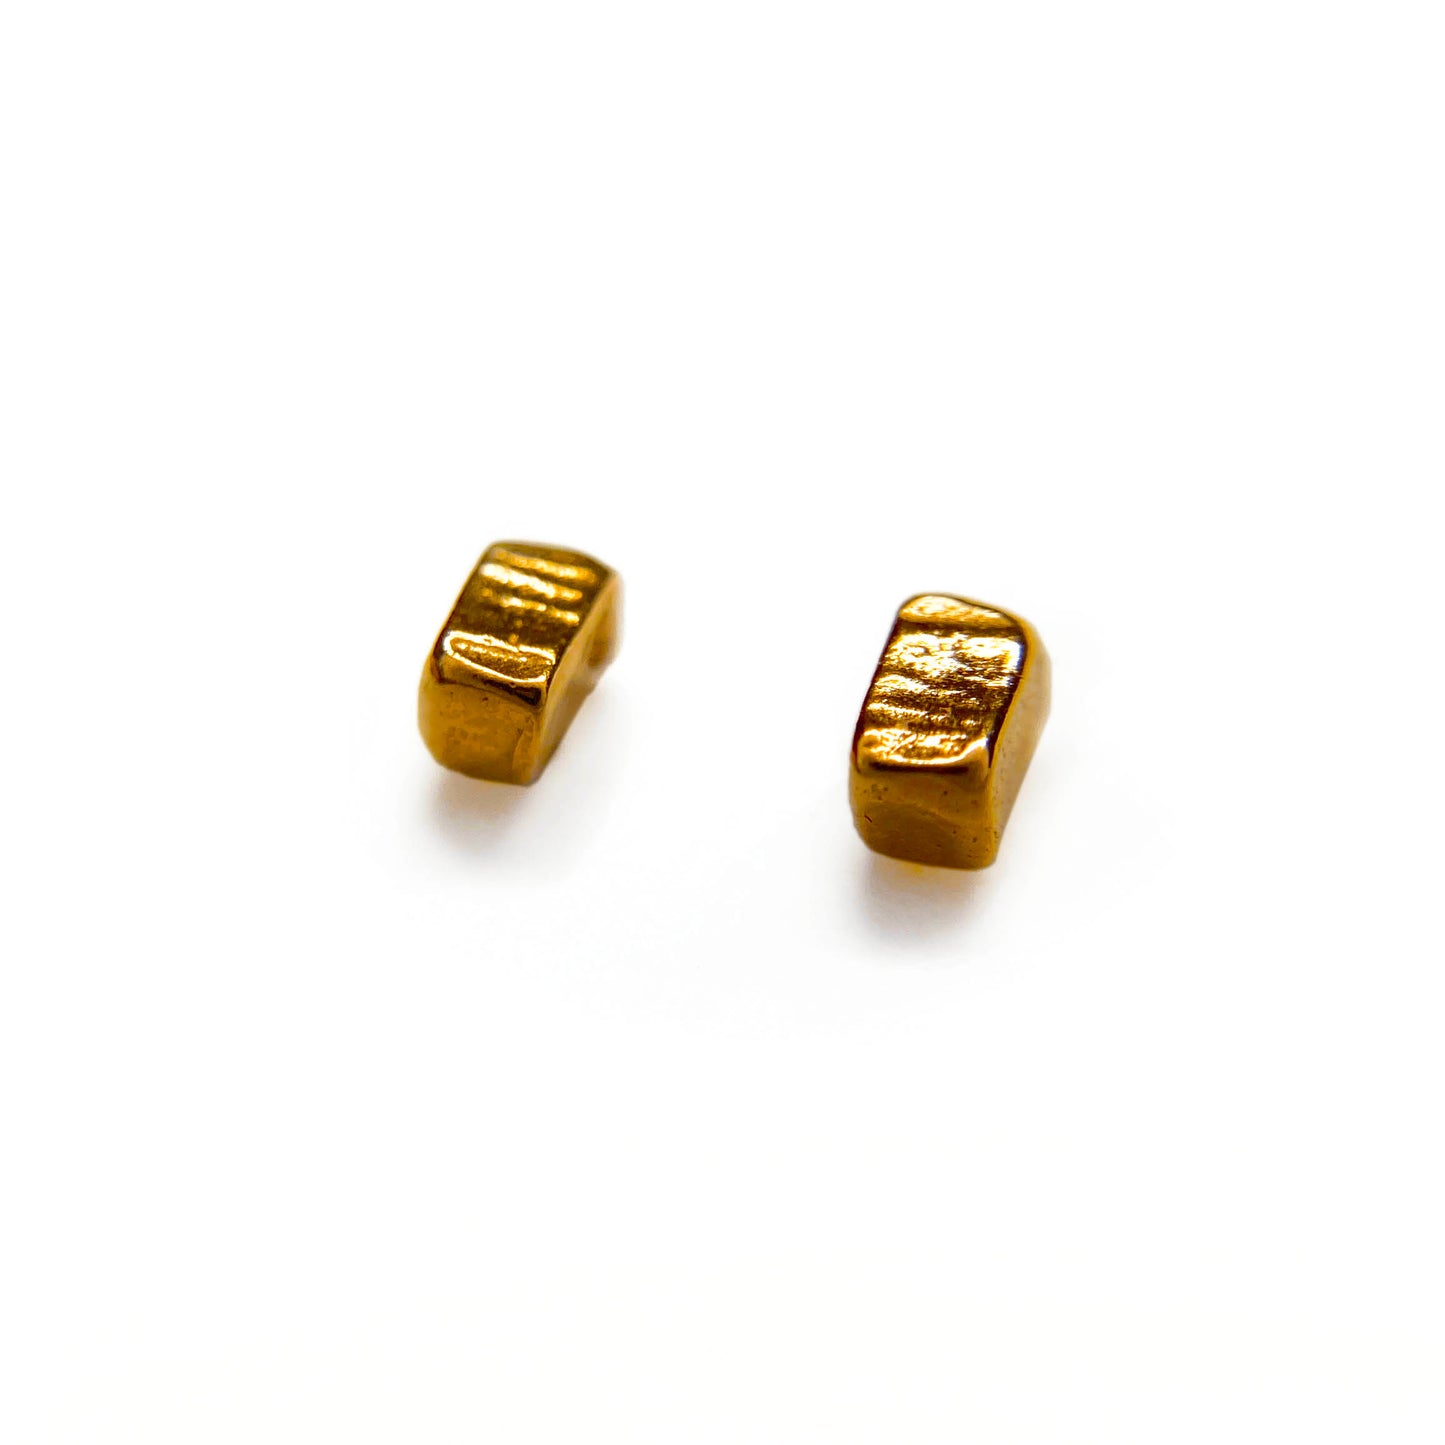 Two rose gold vermeil studs laid flat at an angle on a white background